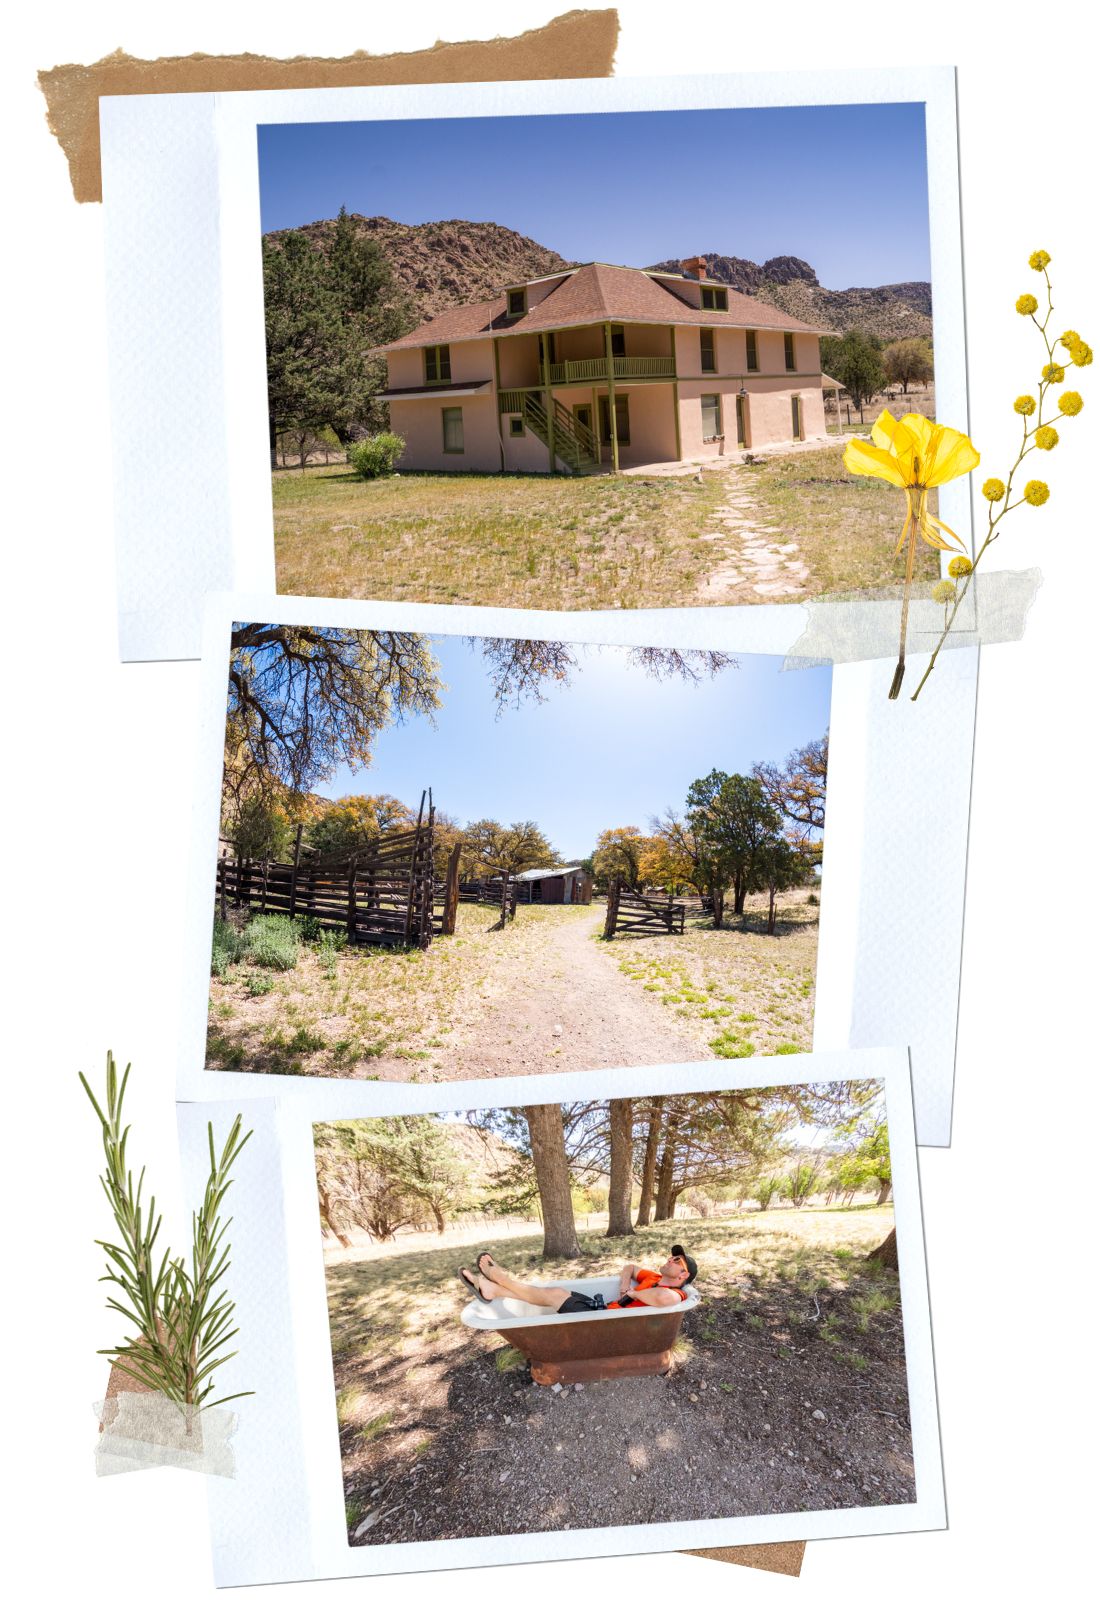 Faraway Ranch - Complete Guide for the Scenic Drive in Chiricahua National Monument